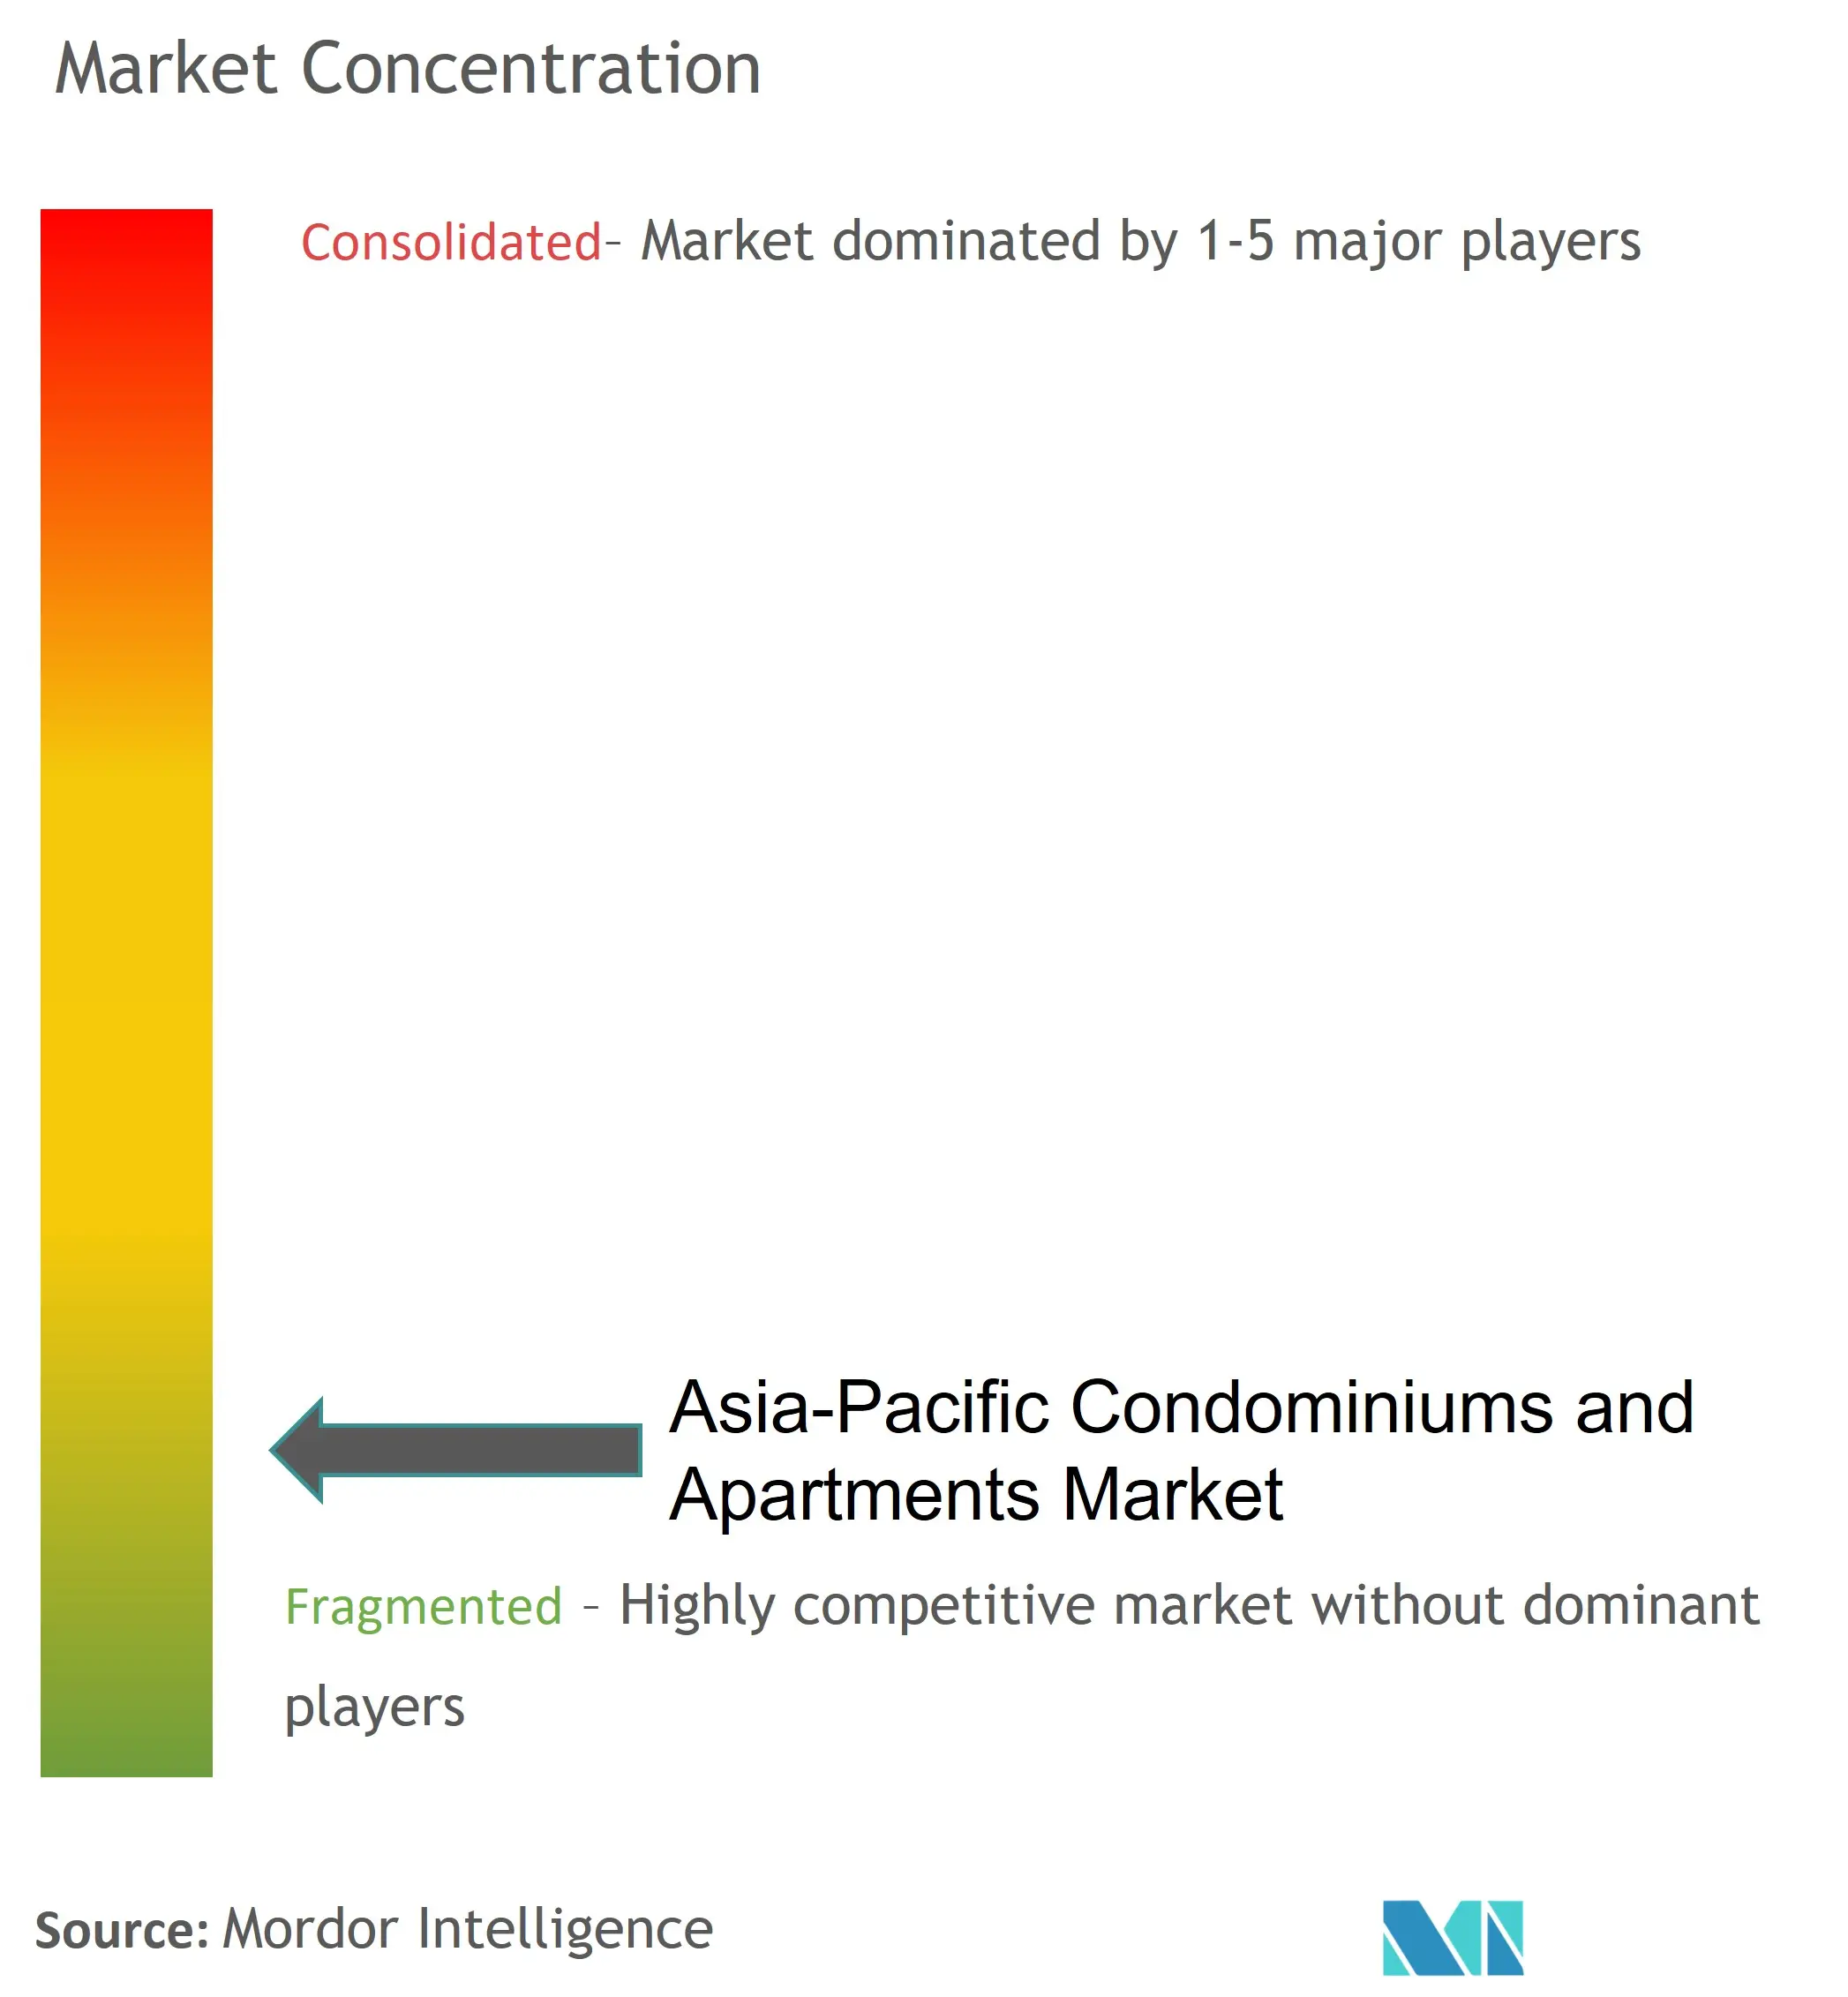 Asia-Pacific Condominiums and Apartments Market  Concentration